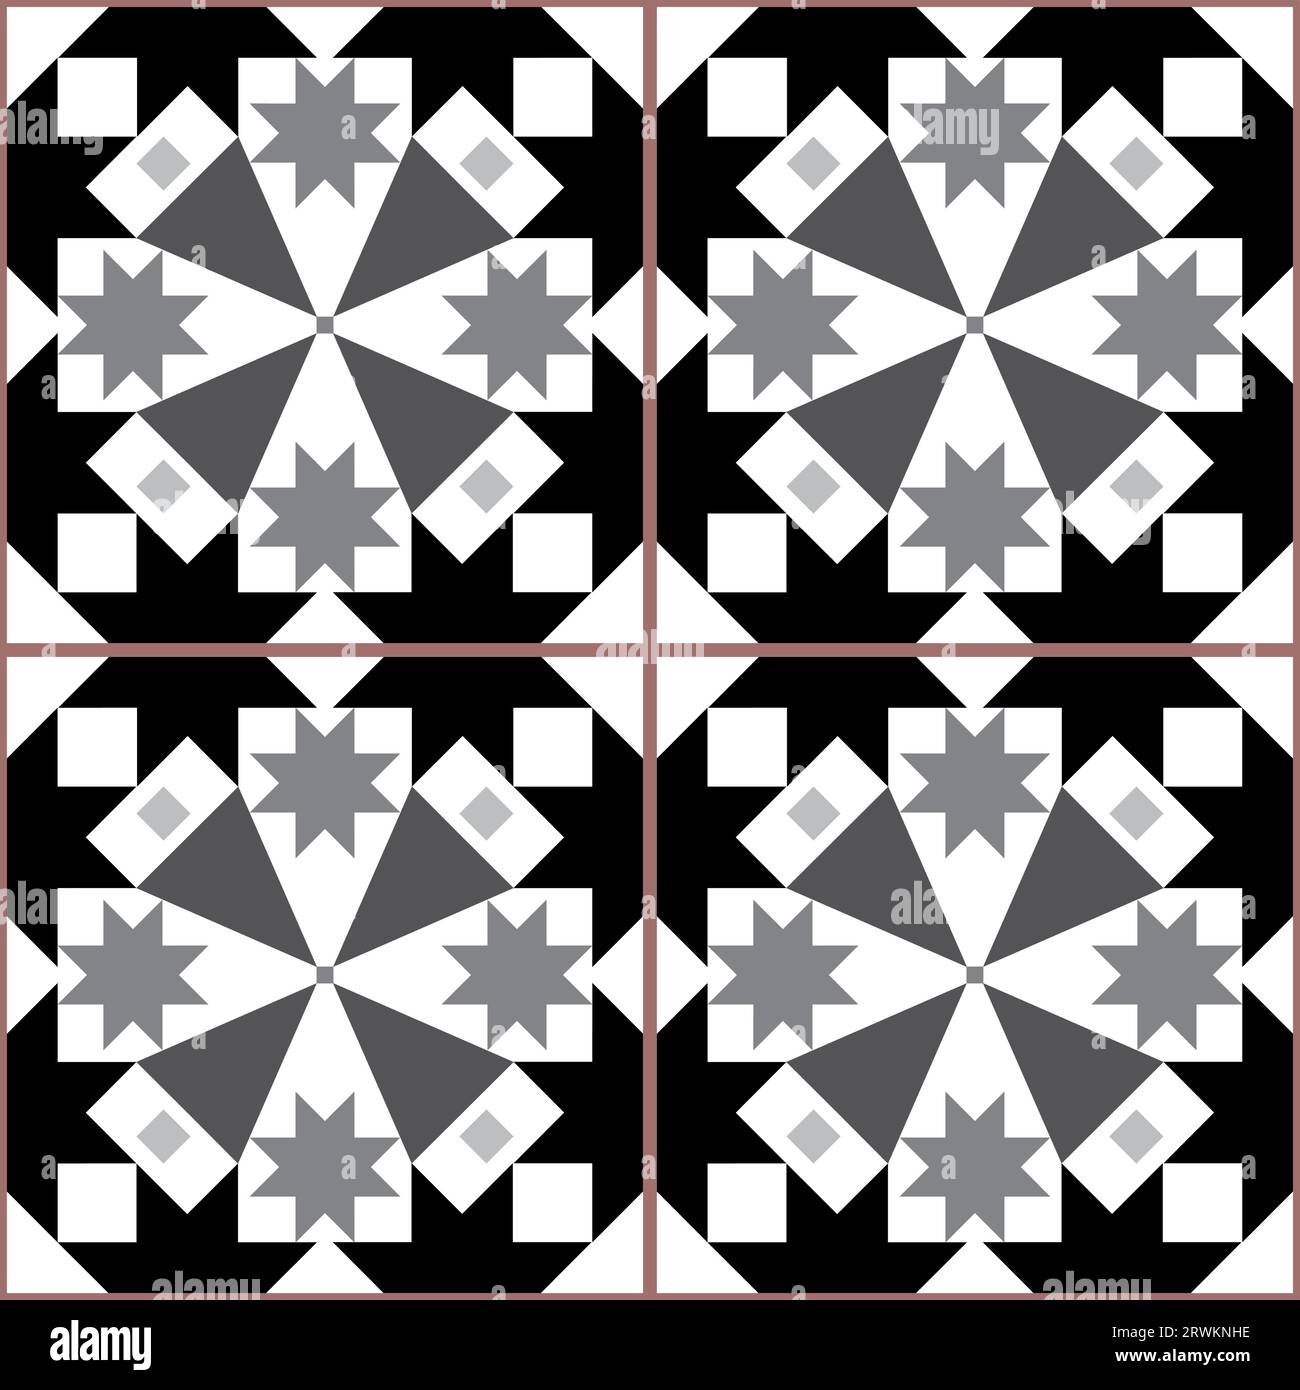 Lisbon style Azulejo tile seamless vector black and gray pattern, elegant decorative design inspired by art from Portugal with floral and geometric mo Stock Vector